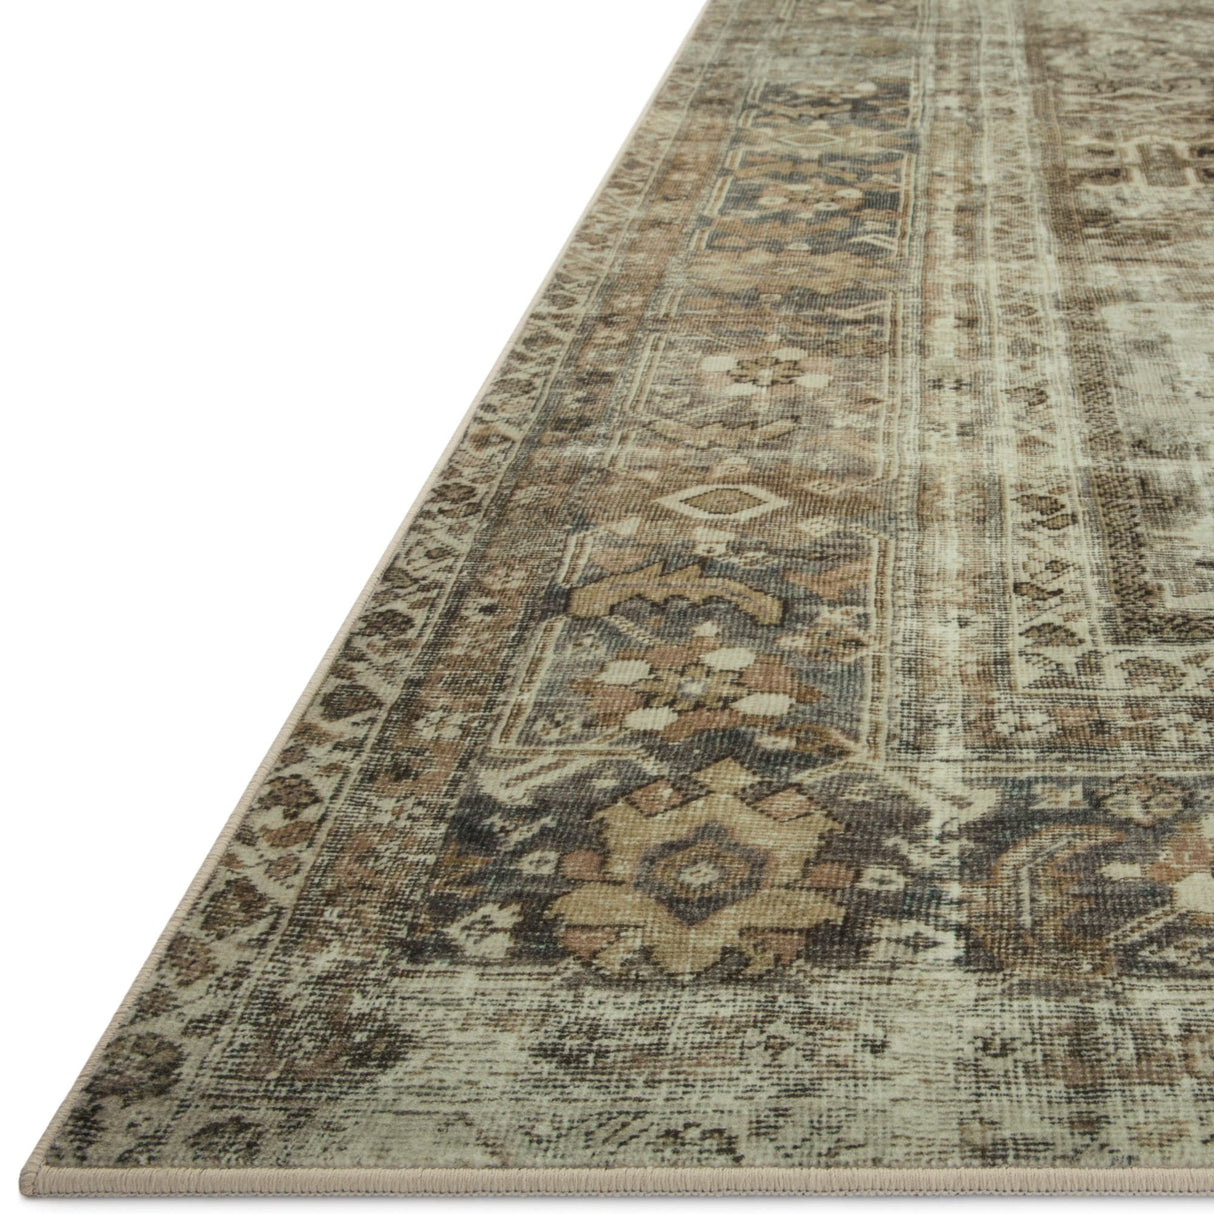 Magnolia Home Sinclair Runner - Pebble/Taupe Rugs